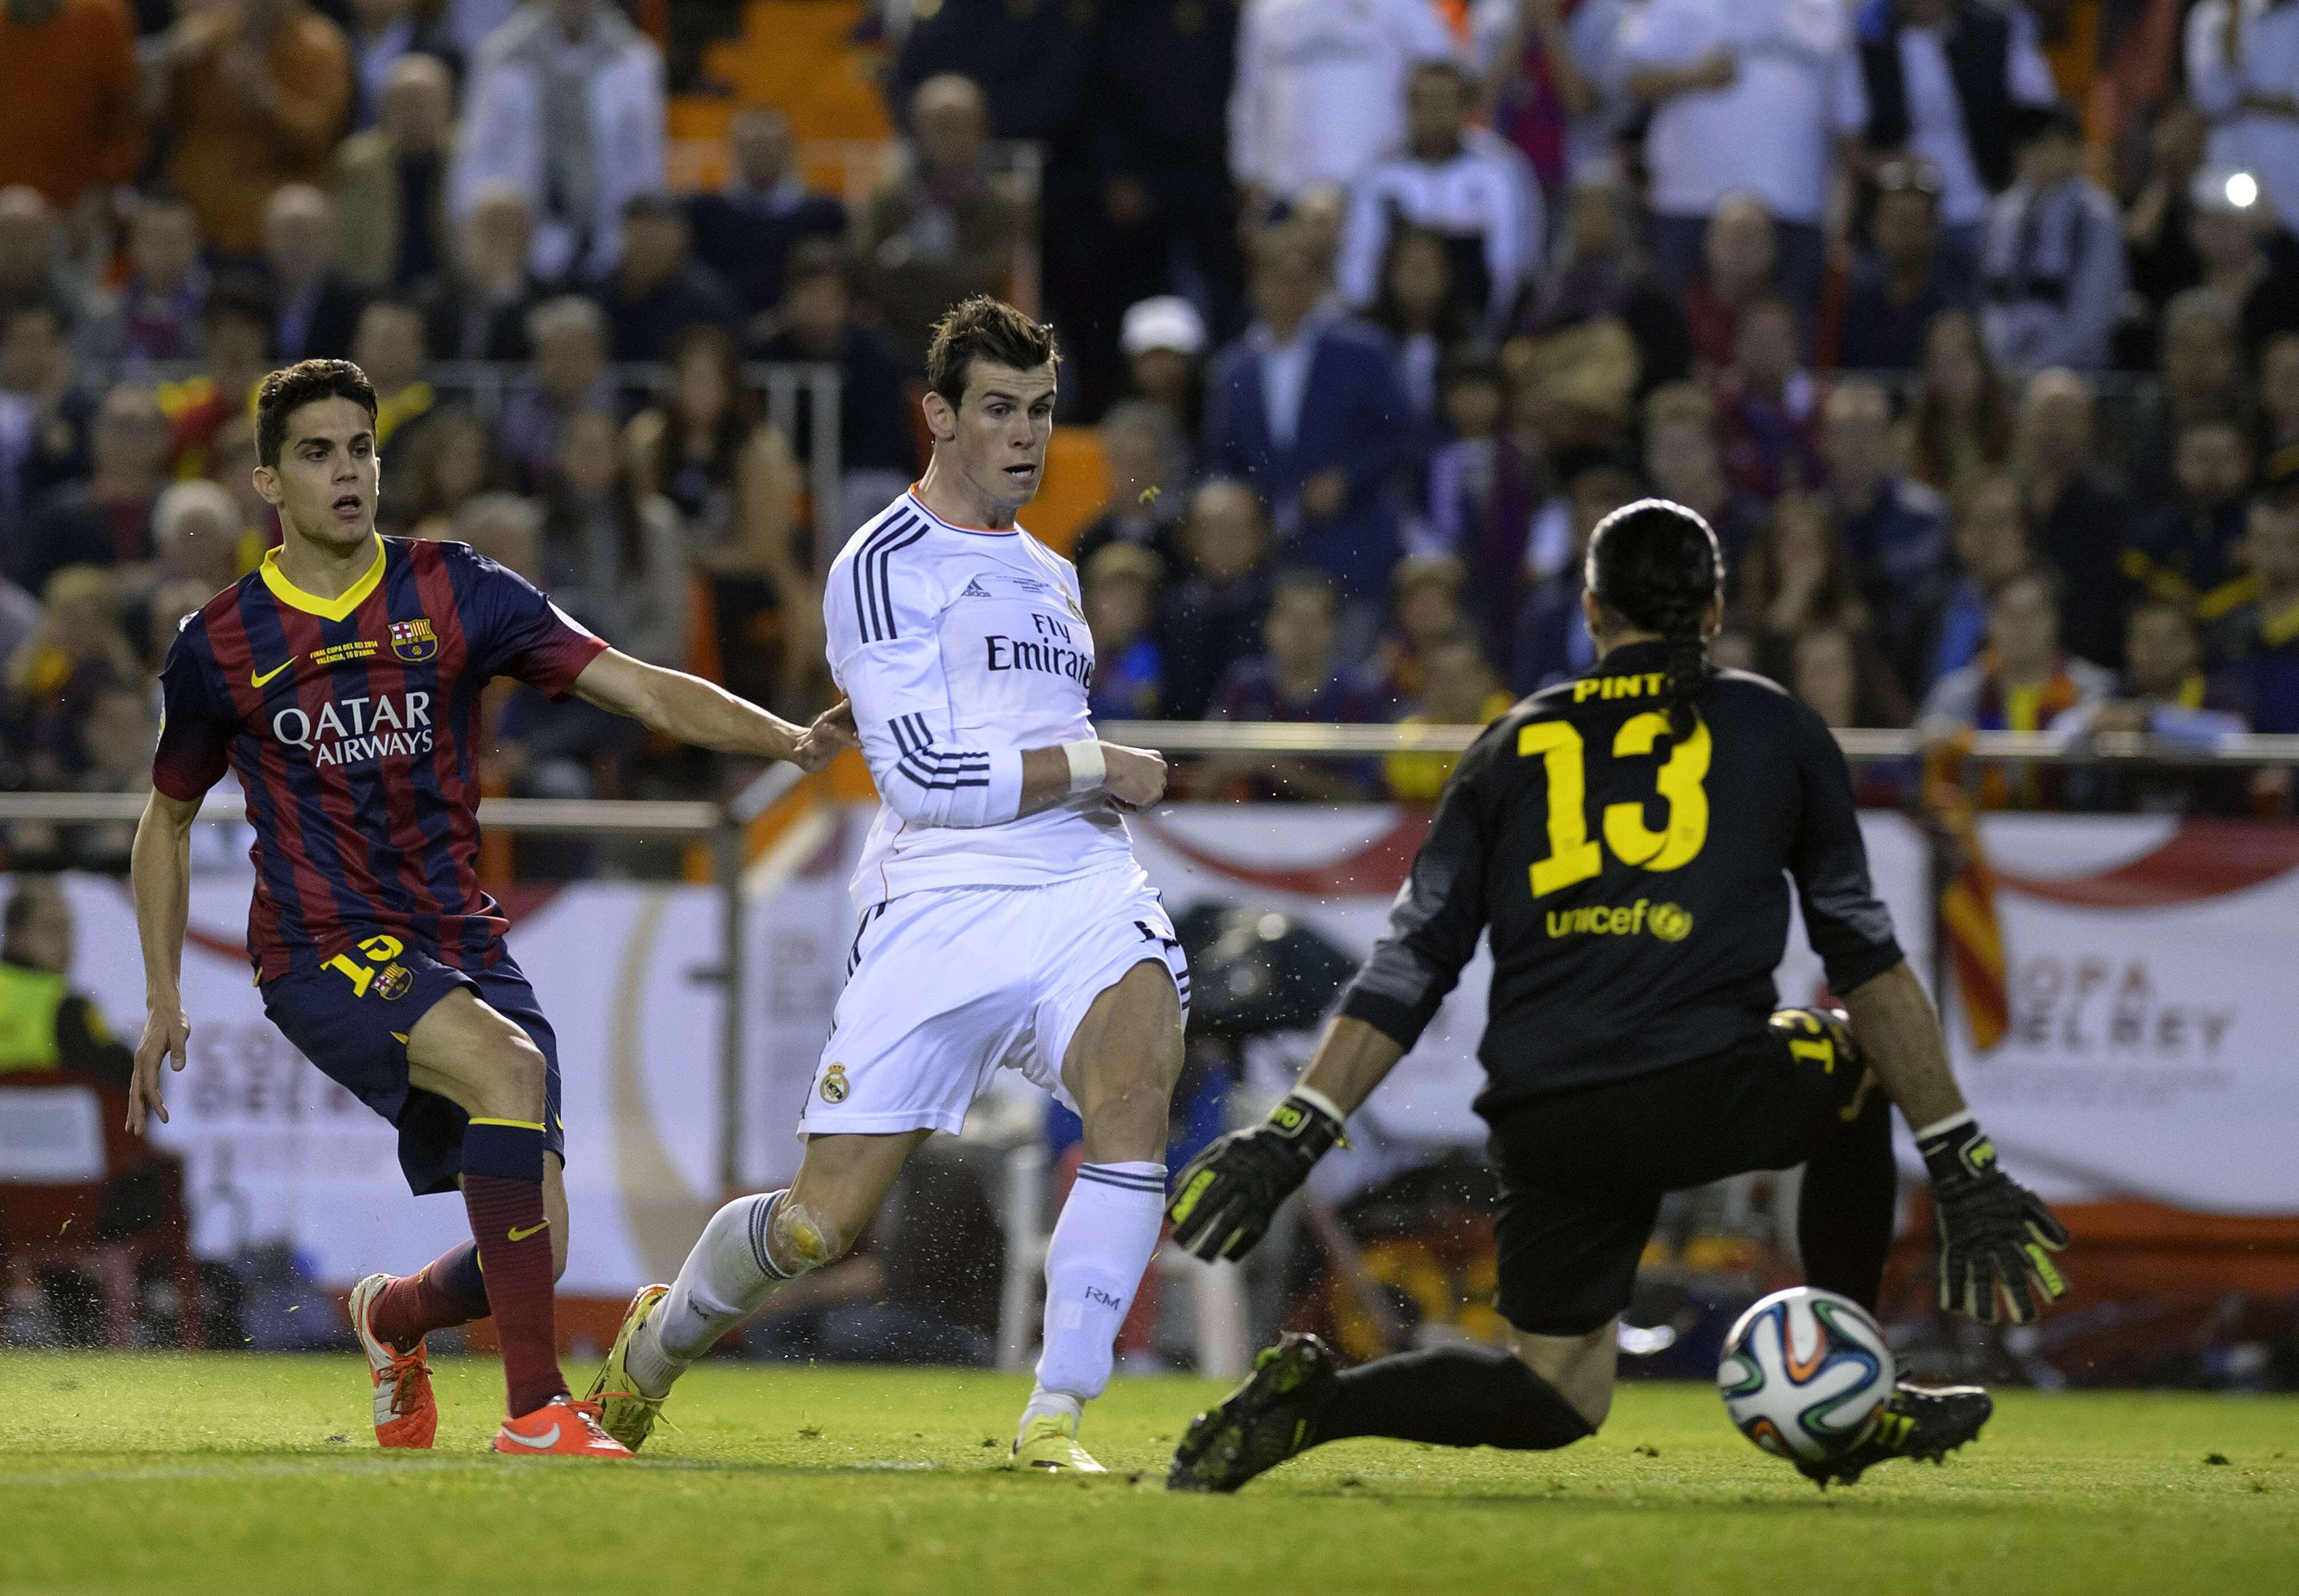 Real Madrid's Welsh forward Gareth Bale (C) scores during the Spanish Copa del Rey (King's Cup) final "Clasico" football match FC Barcelona vs Real Madrid CF at the Mestalla stadium in Valencia on April 16, 2014.   AFP PHOTO/ DANI POZO
FINAL COPA DEL REY
GOL 1-2 BALE
PUBLICADA 17/04/14 NA MA10 2COL